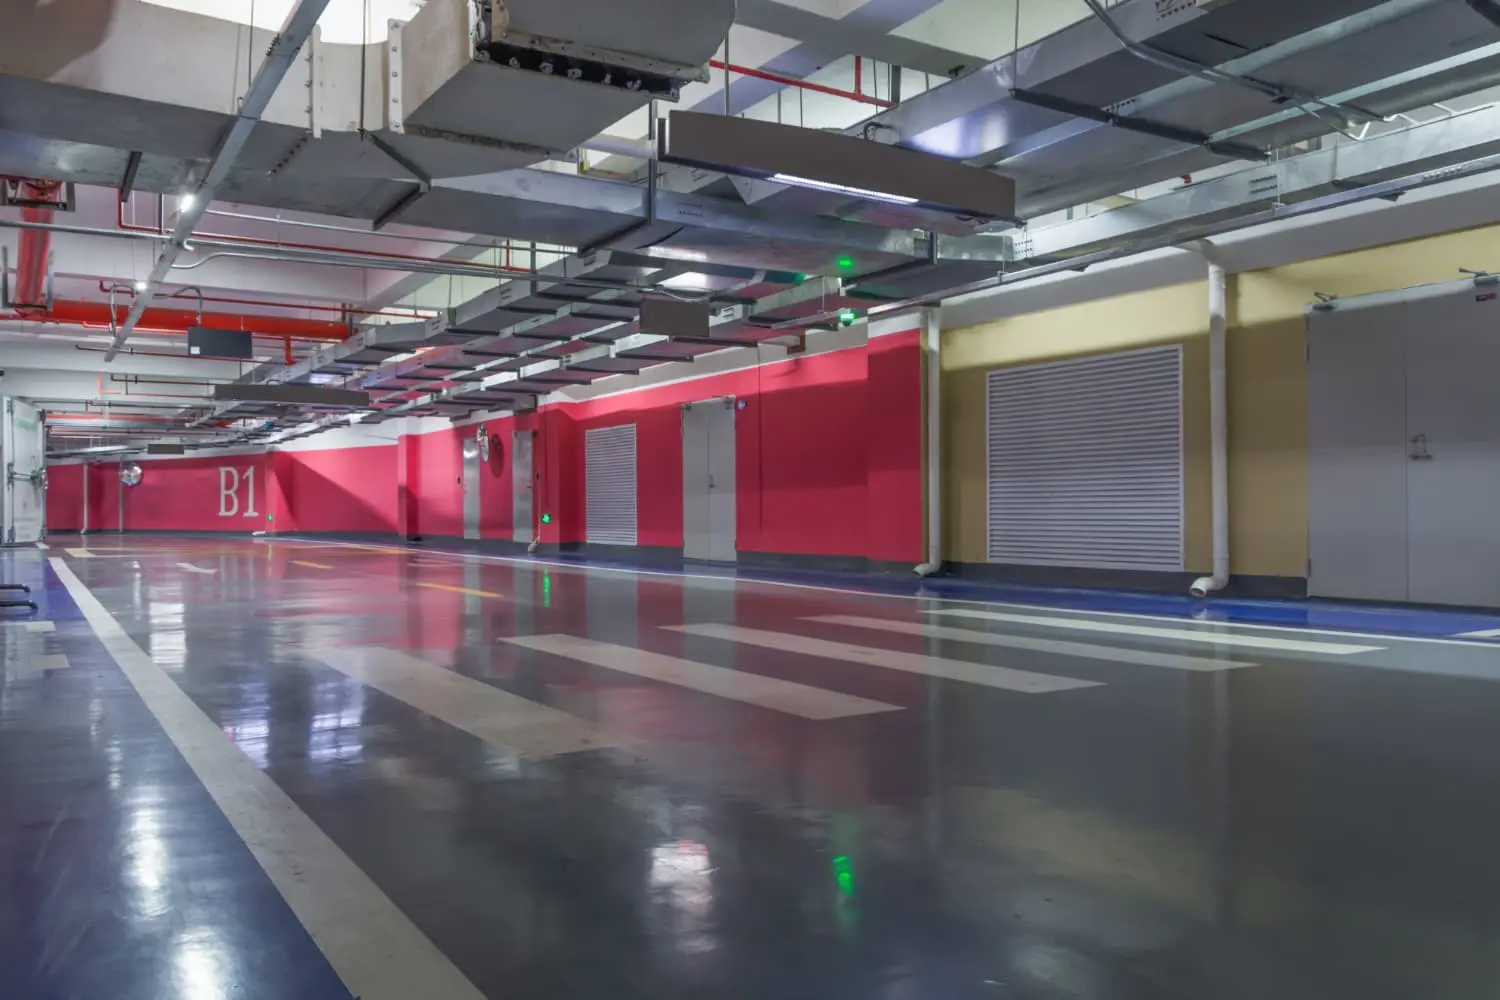 Spacious parking garage with red walls and blue lights illuminated by top parking lot lighting fixtures